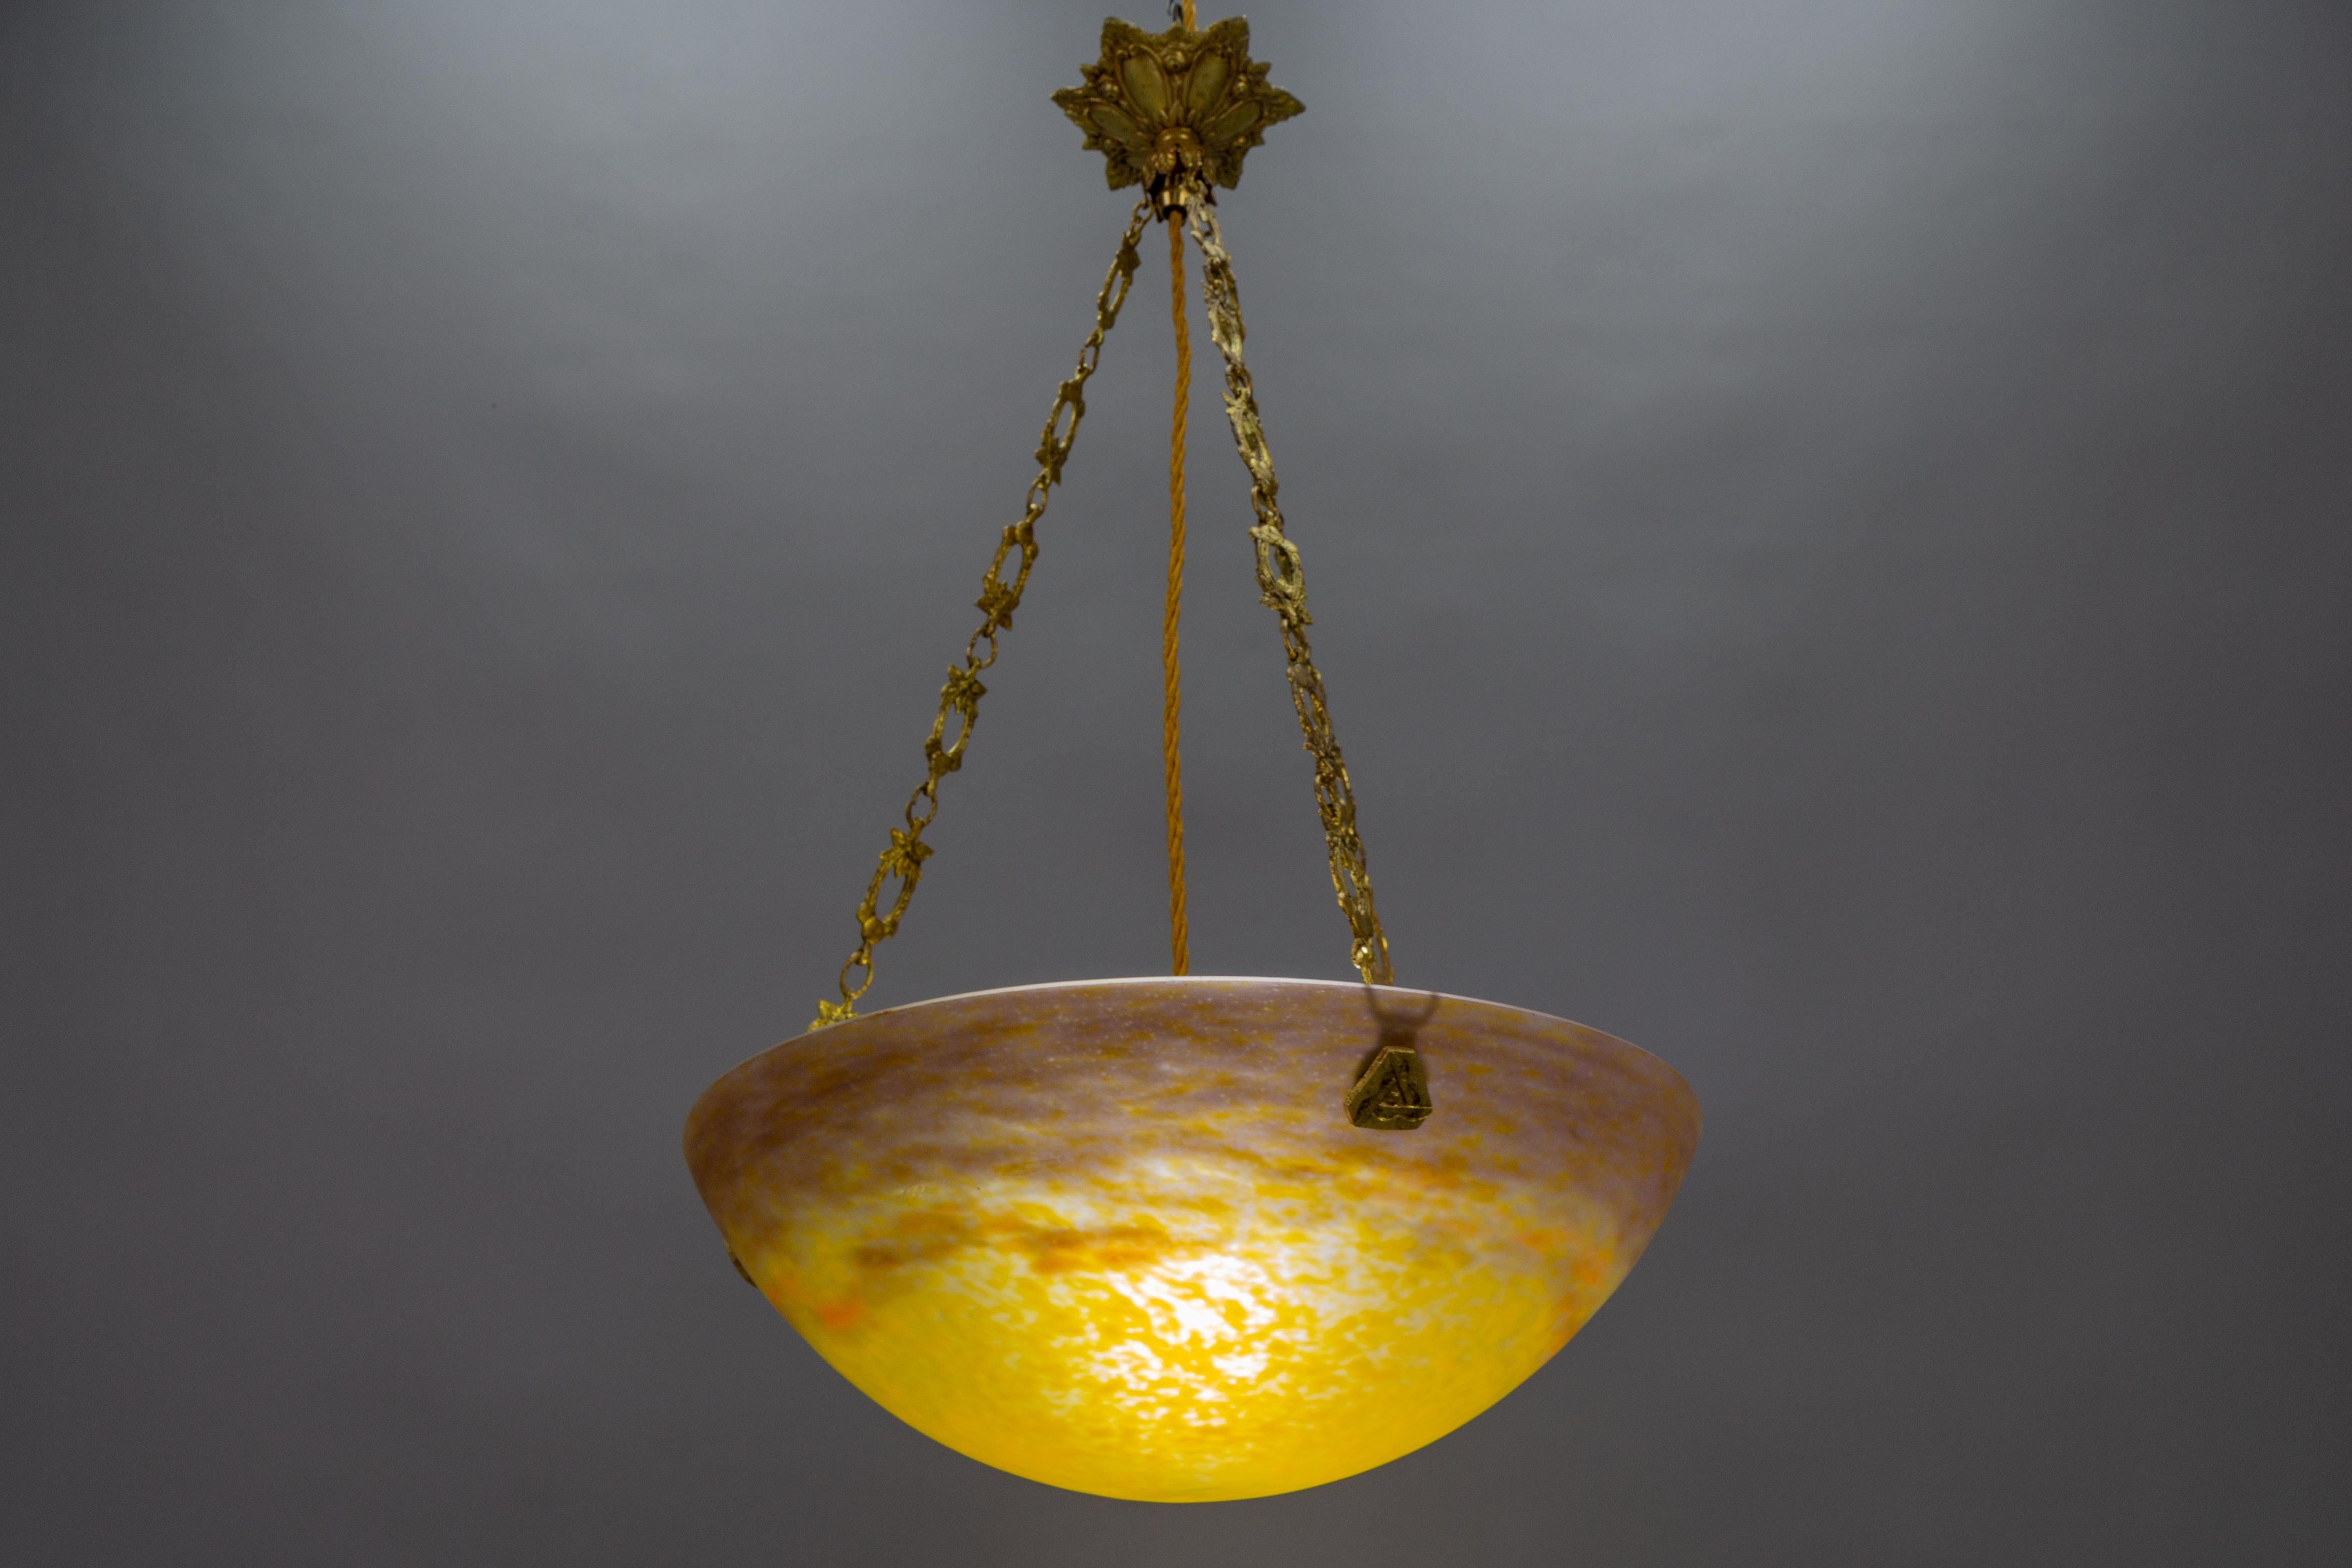 Metal French Art Deco Yellow Pendant Light by G.V. de Croismare, Muller Frères, 1920s For Sale